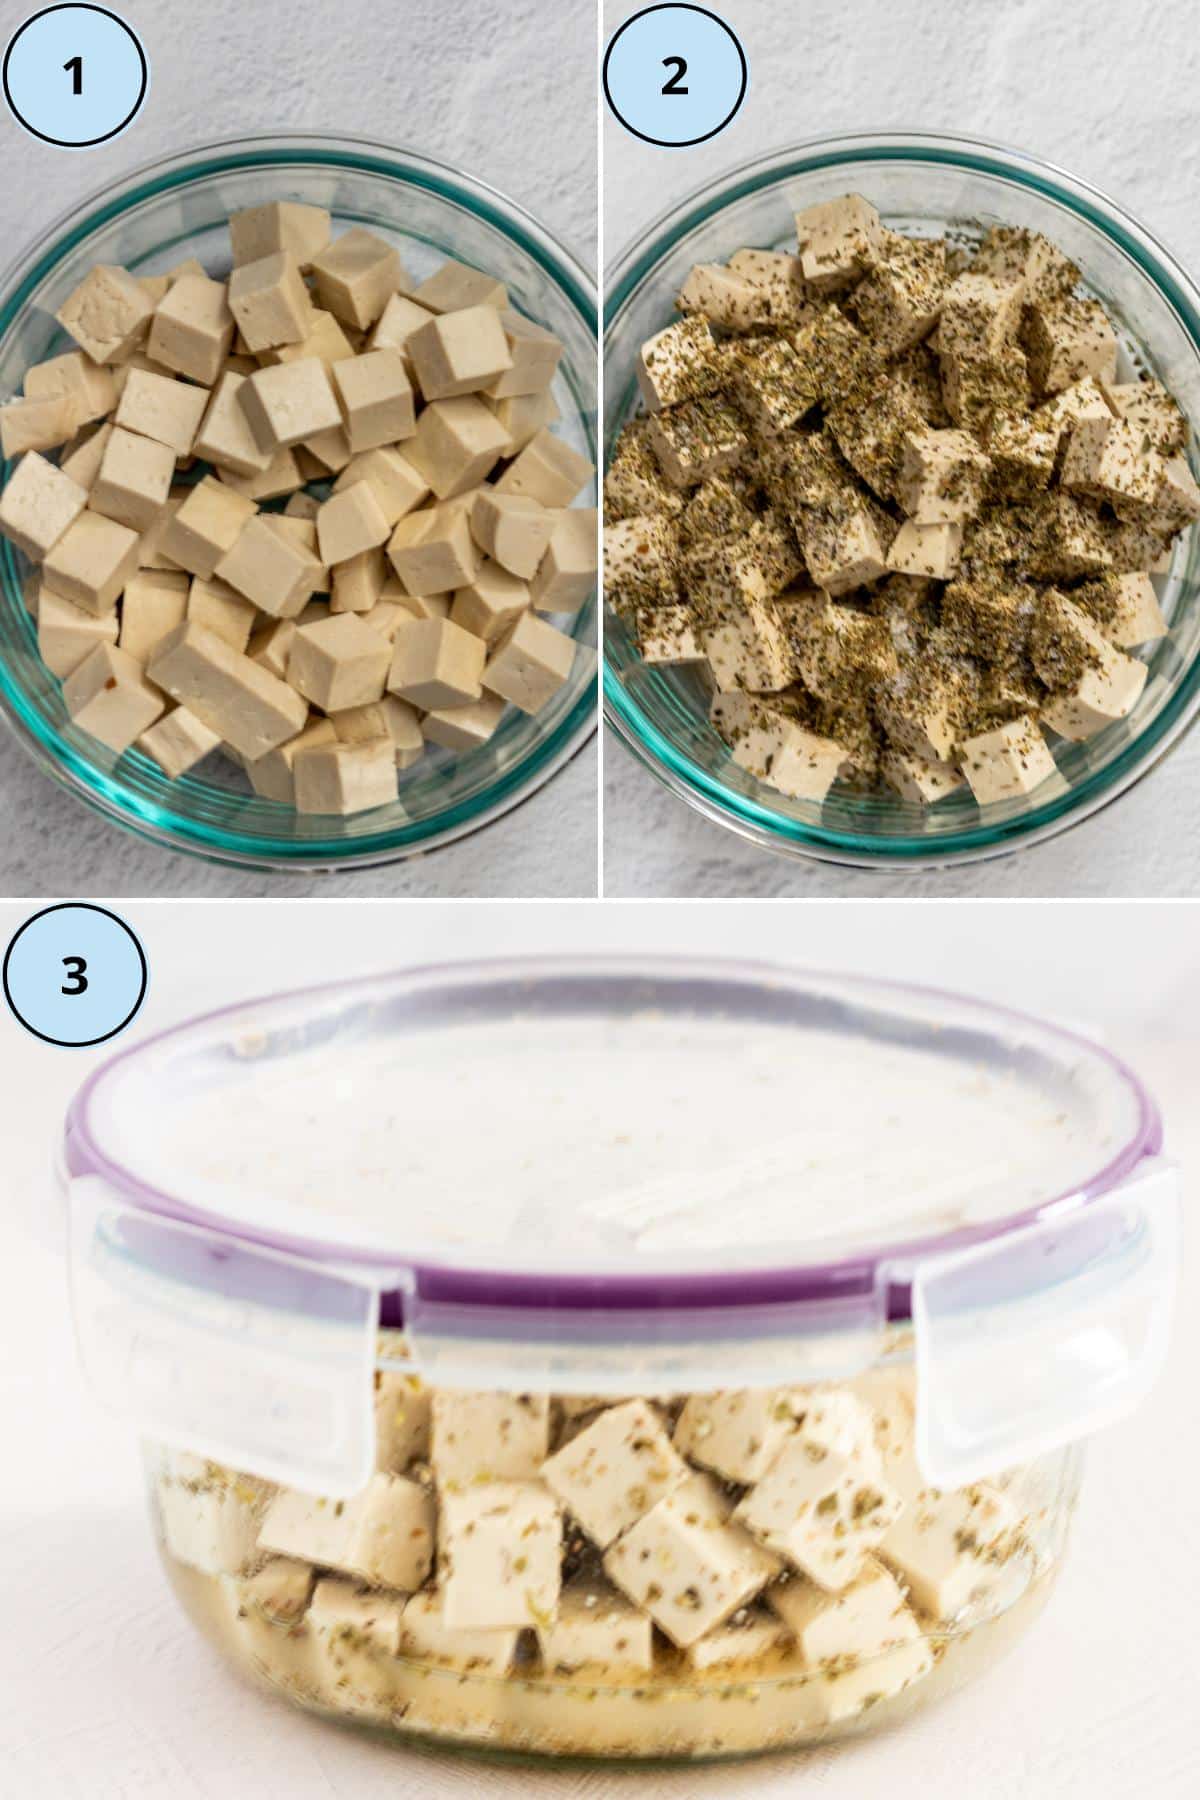 Tofu cubes in a bowl, seasonings added to the tofu, and the tofu marinating in a bowl with a lid.